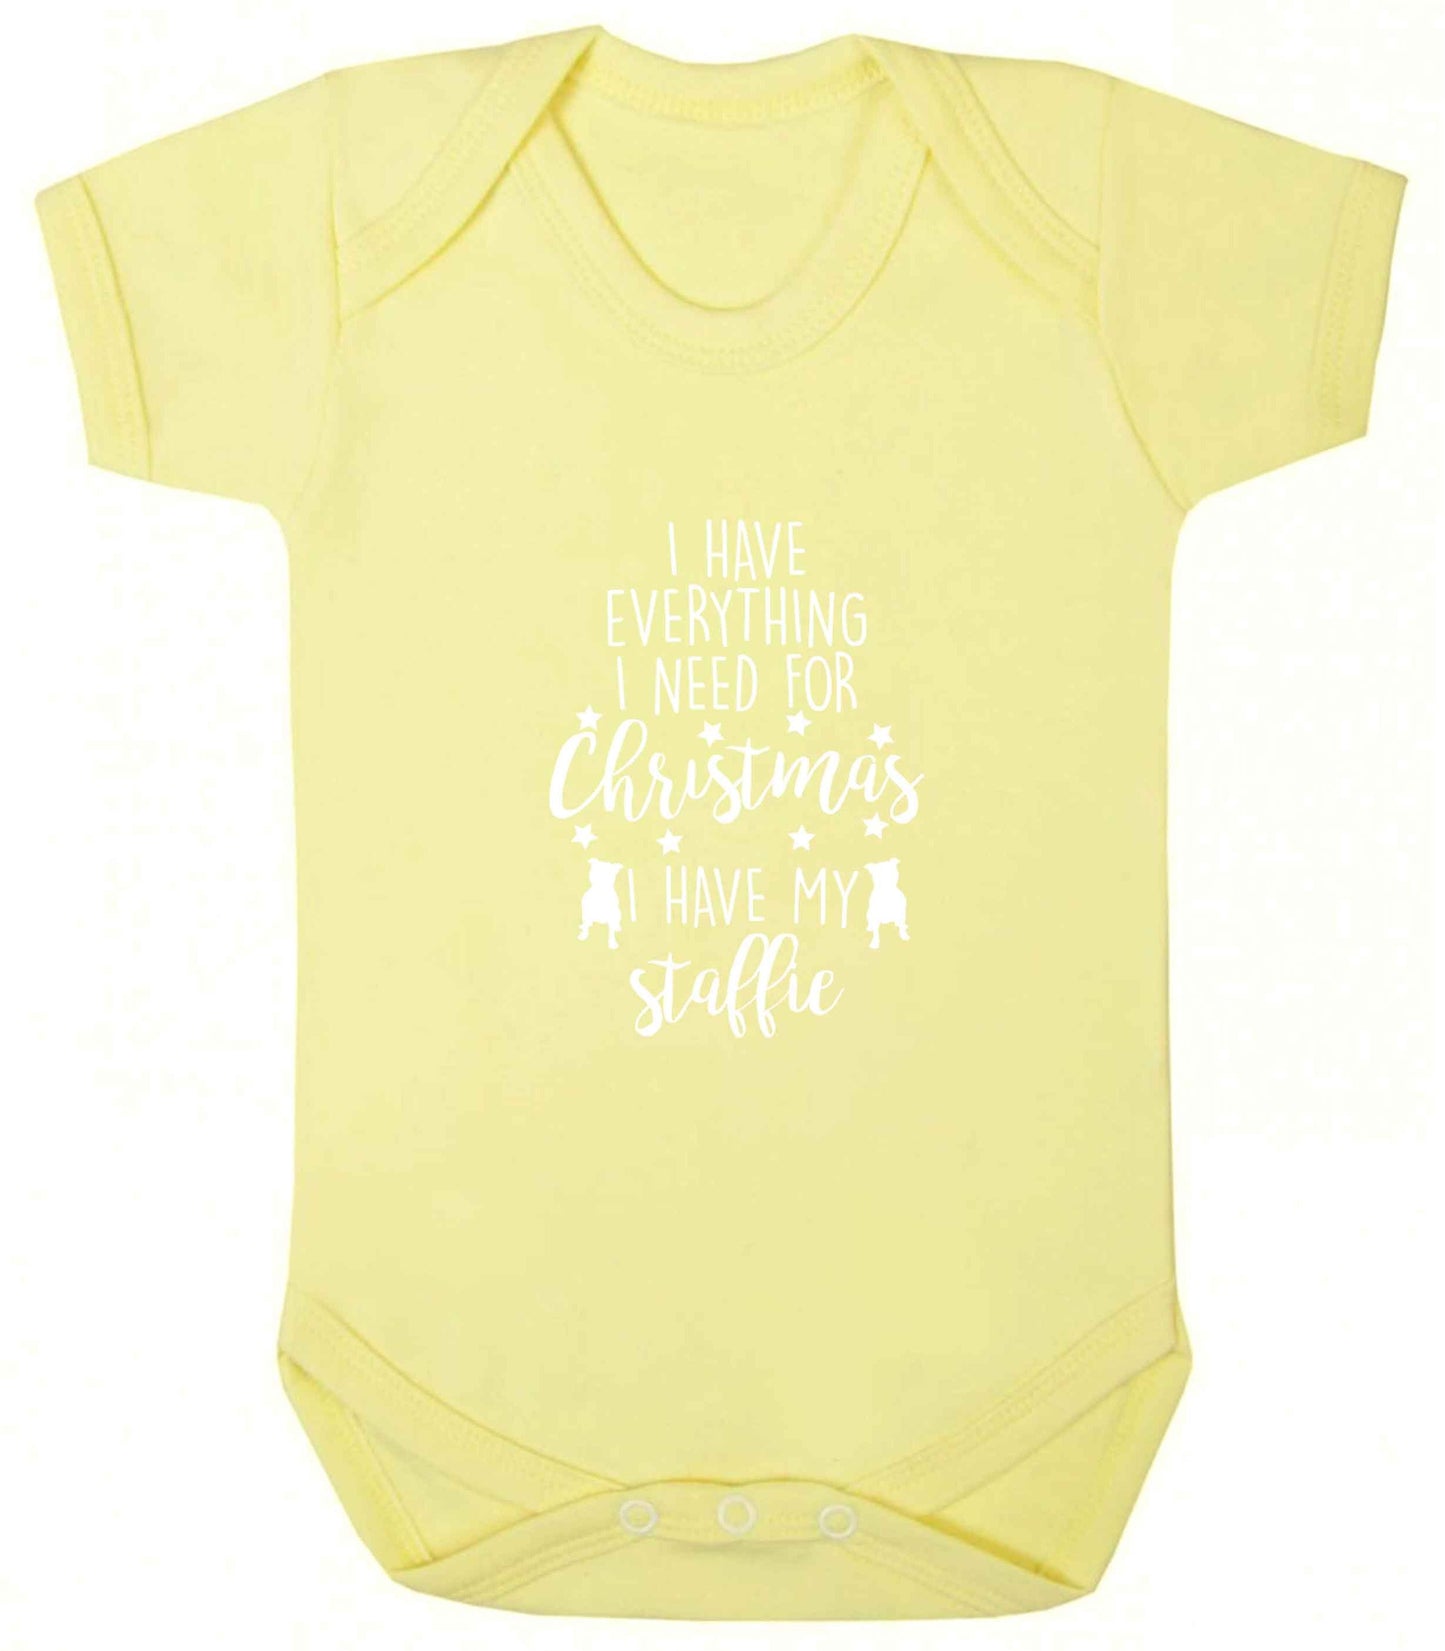 I have everything I need for Christmas I have my staffie baby vest pale yellow 18-24 months